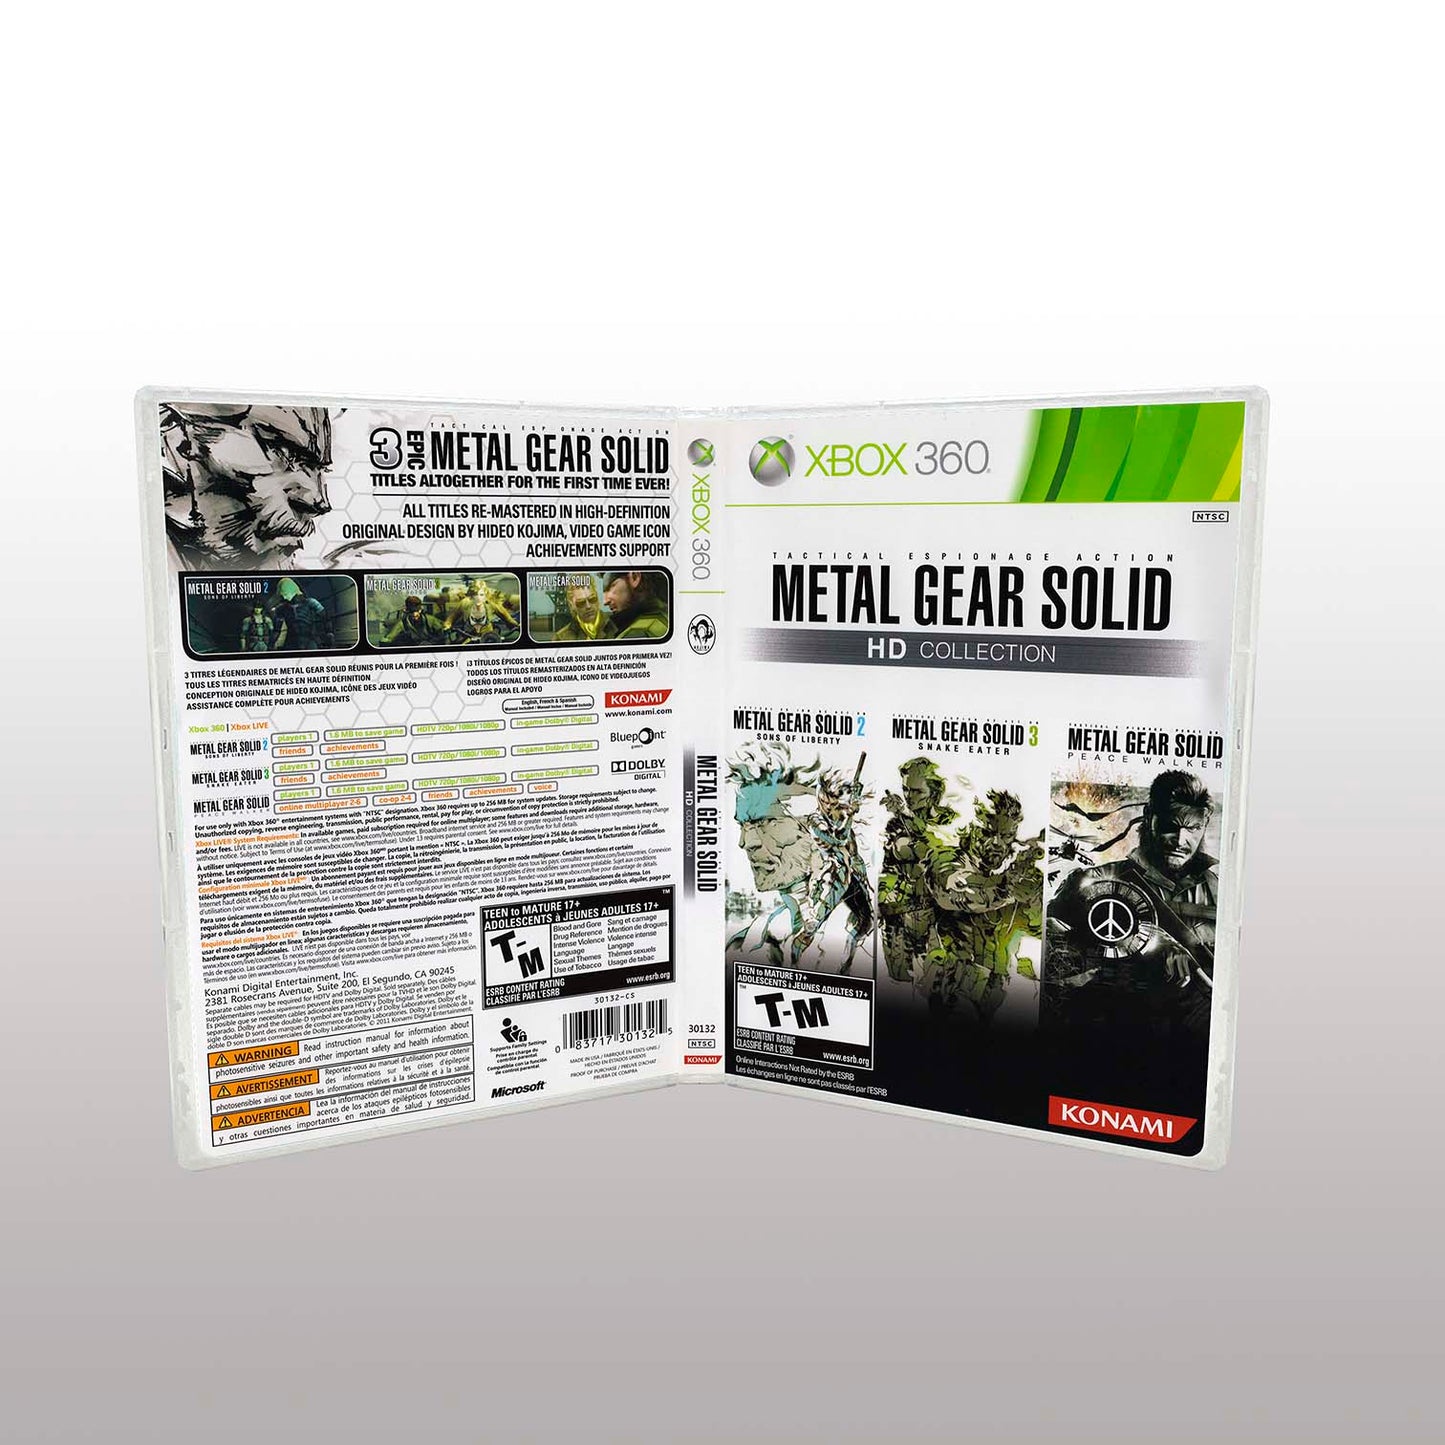 Xbox 360 - NO GAME - Metal Gear Solid HD Collection [2 Disc]